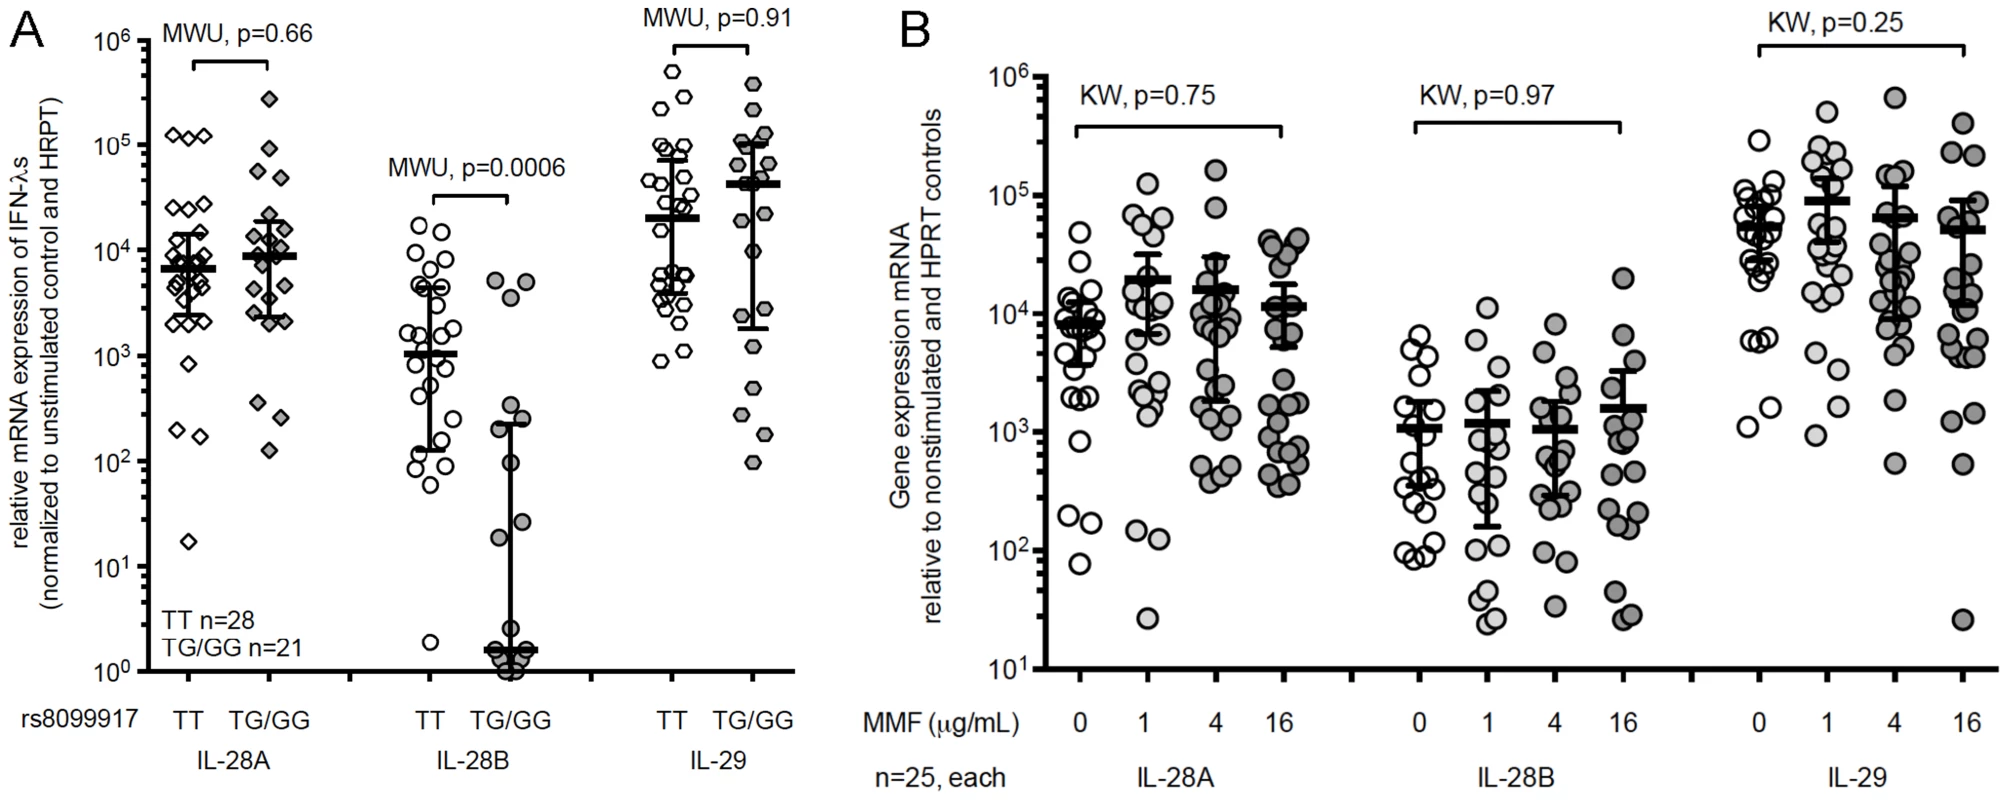 The minor-allele IL-28B genotype is associated with significantly lower expression of IL-28B, but not IL-29 or IL-28A mRNA in healthy volunteers.